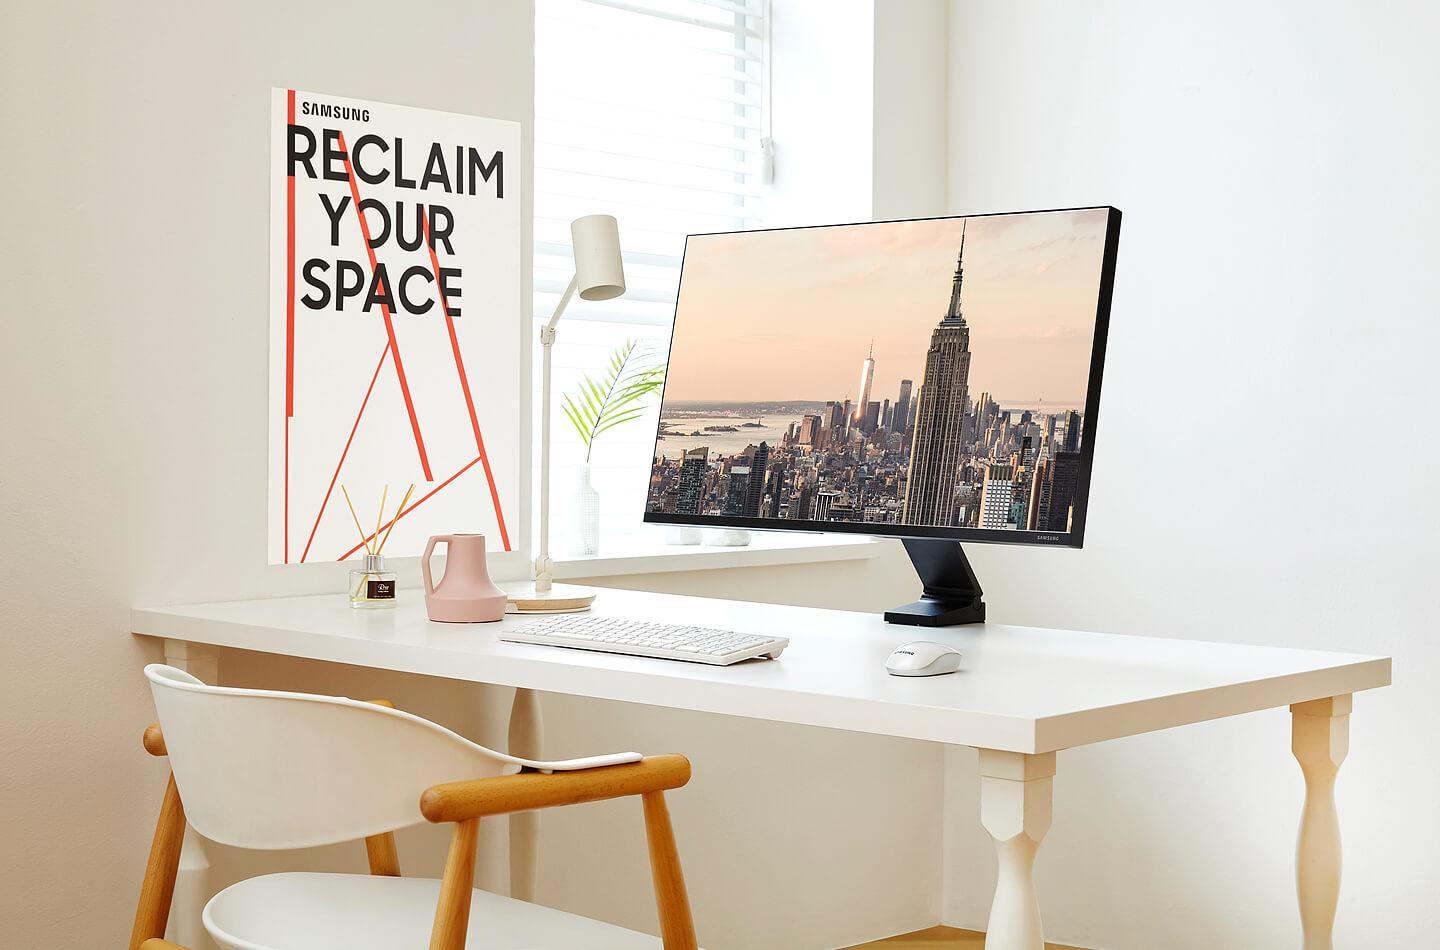 Samsung space monitor